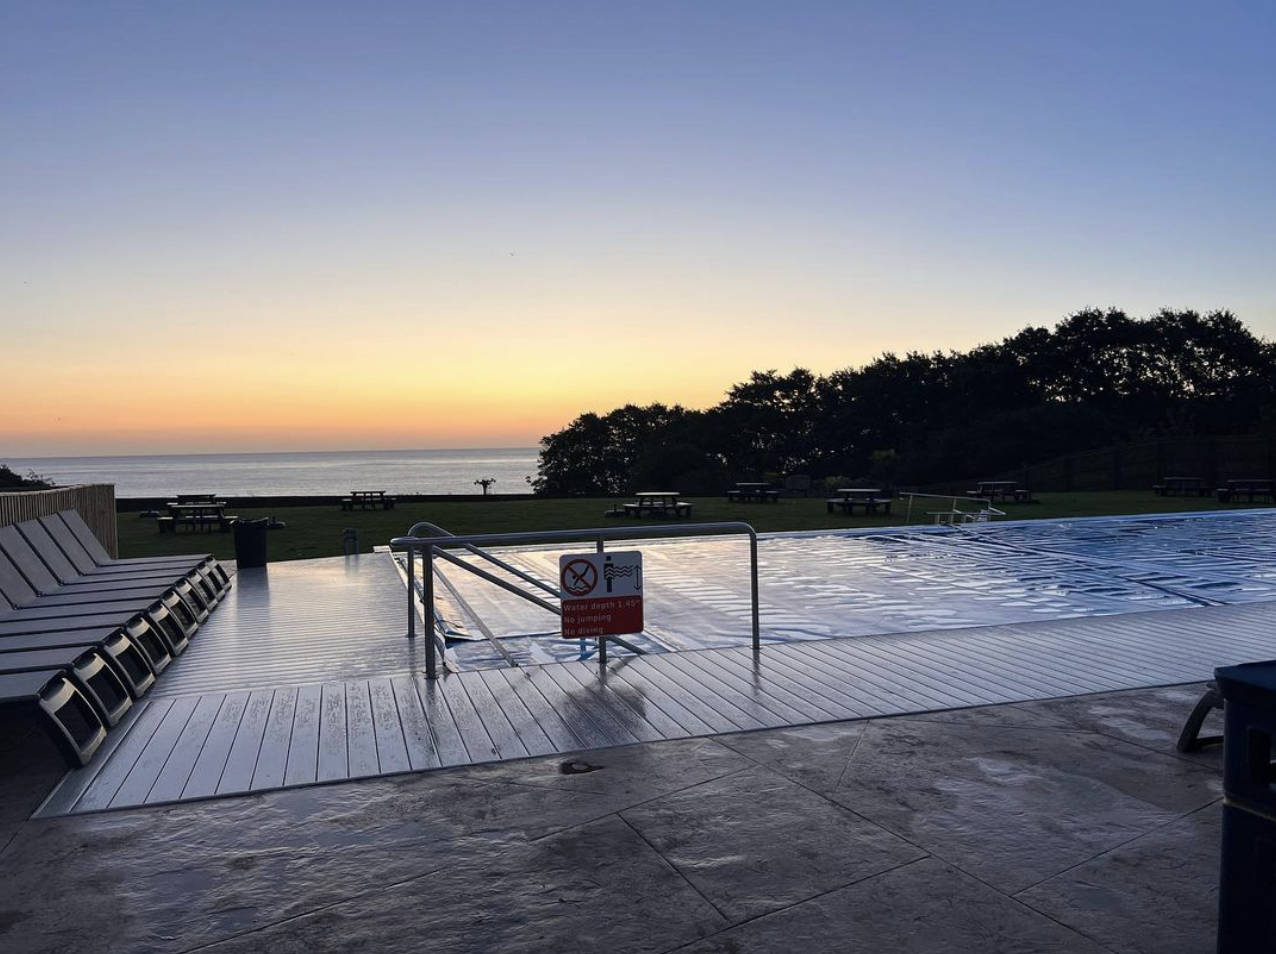 An outdoor pool at sunset at Yorkshire's Alpamare Park. Credit: Instagram